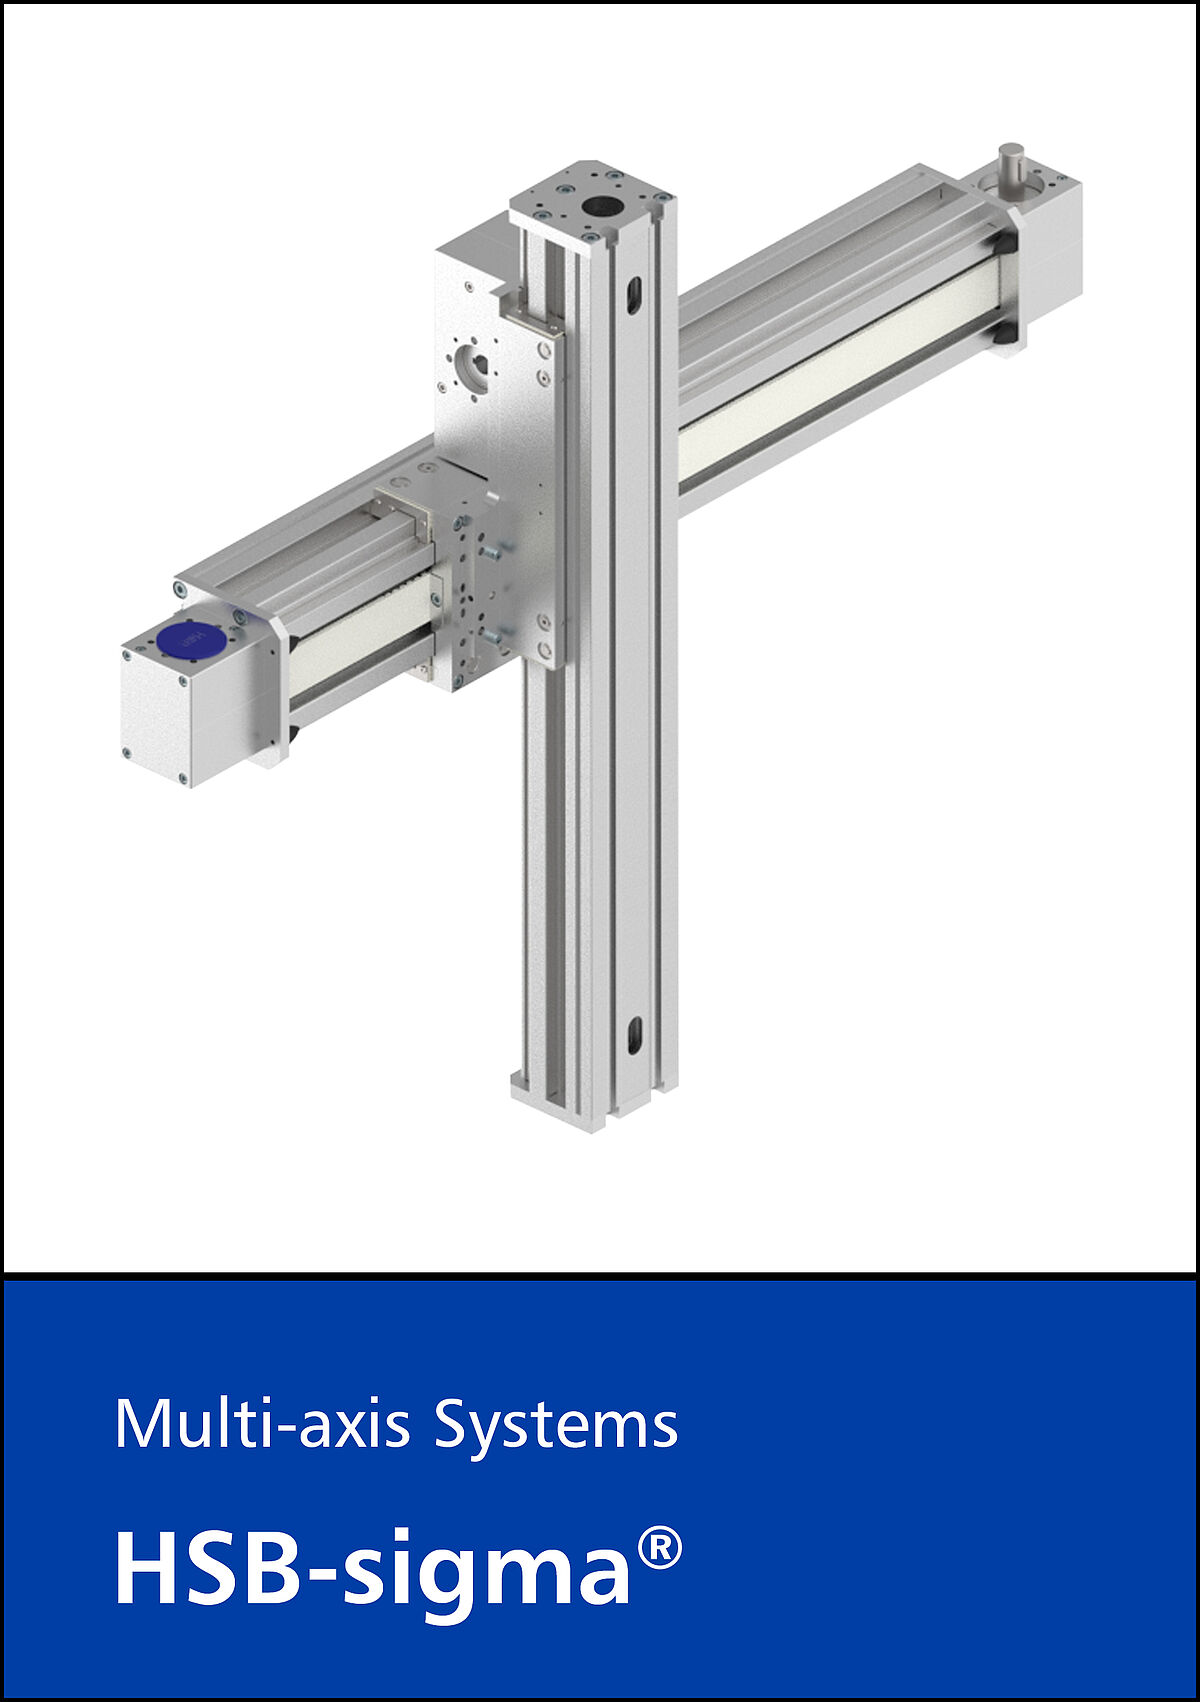 Multi-axis systems HSB-sigma®